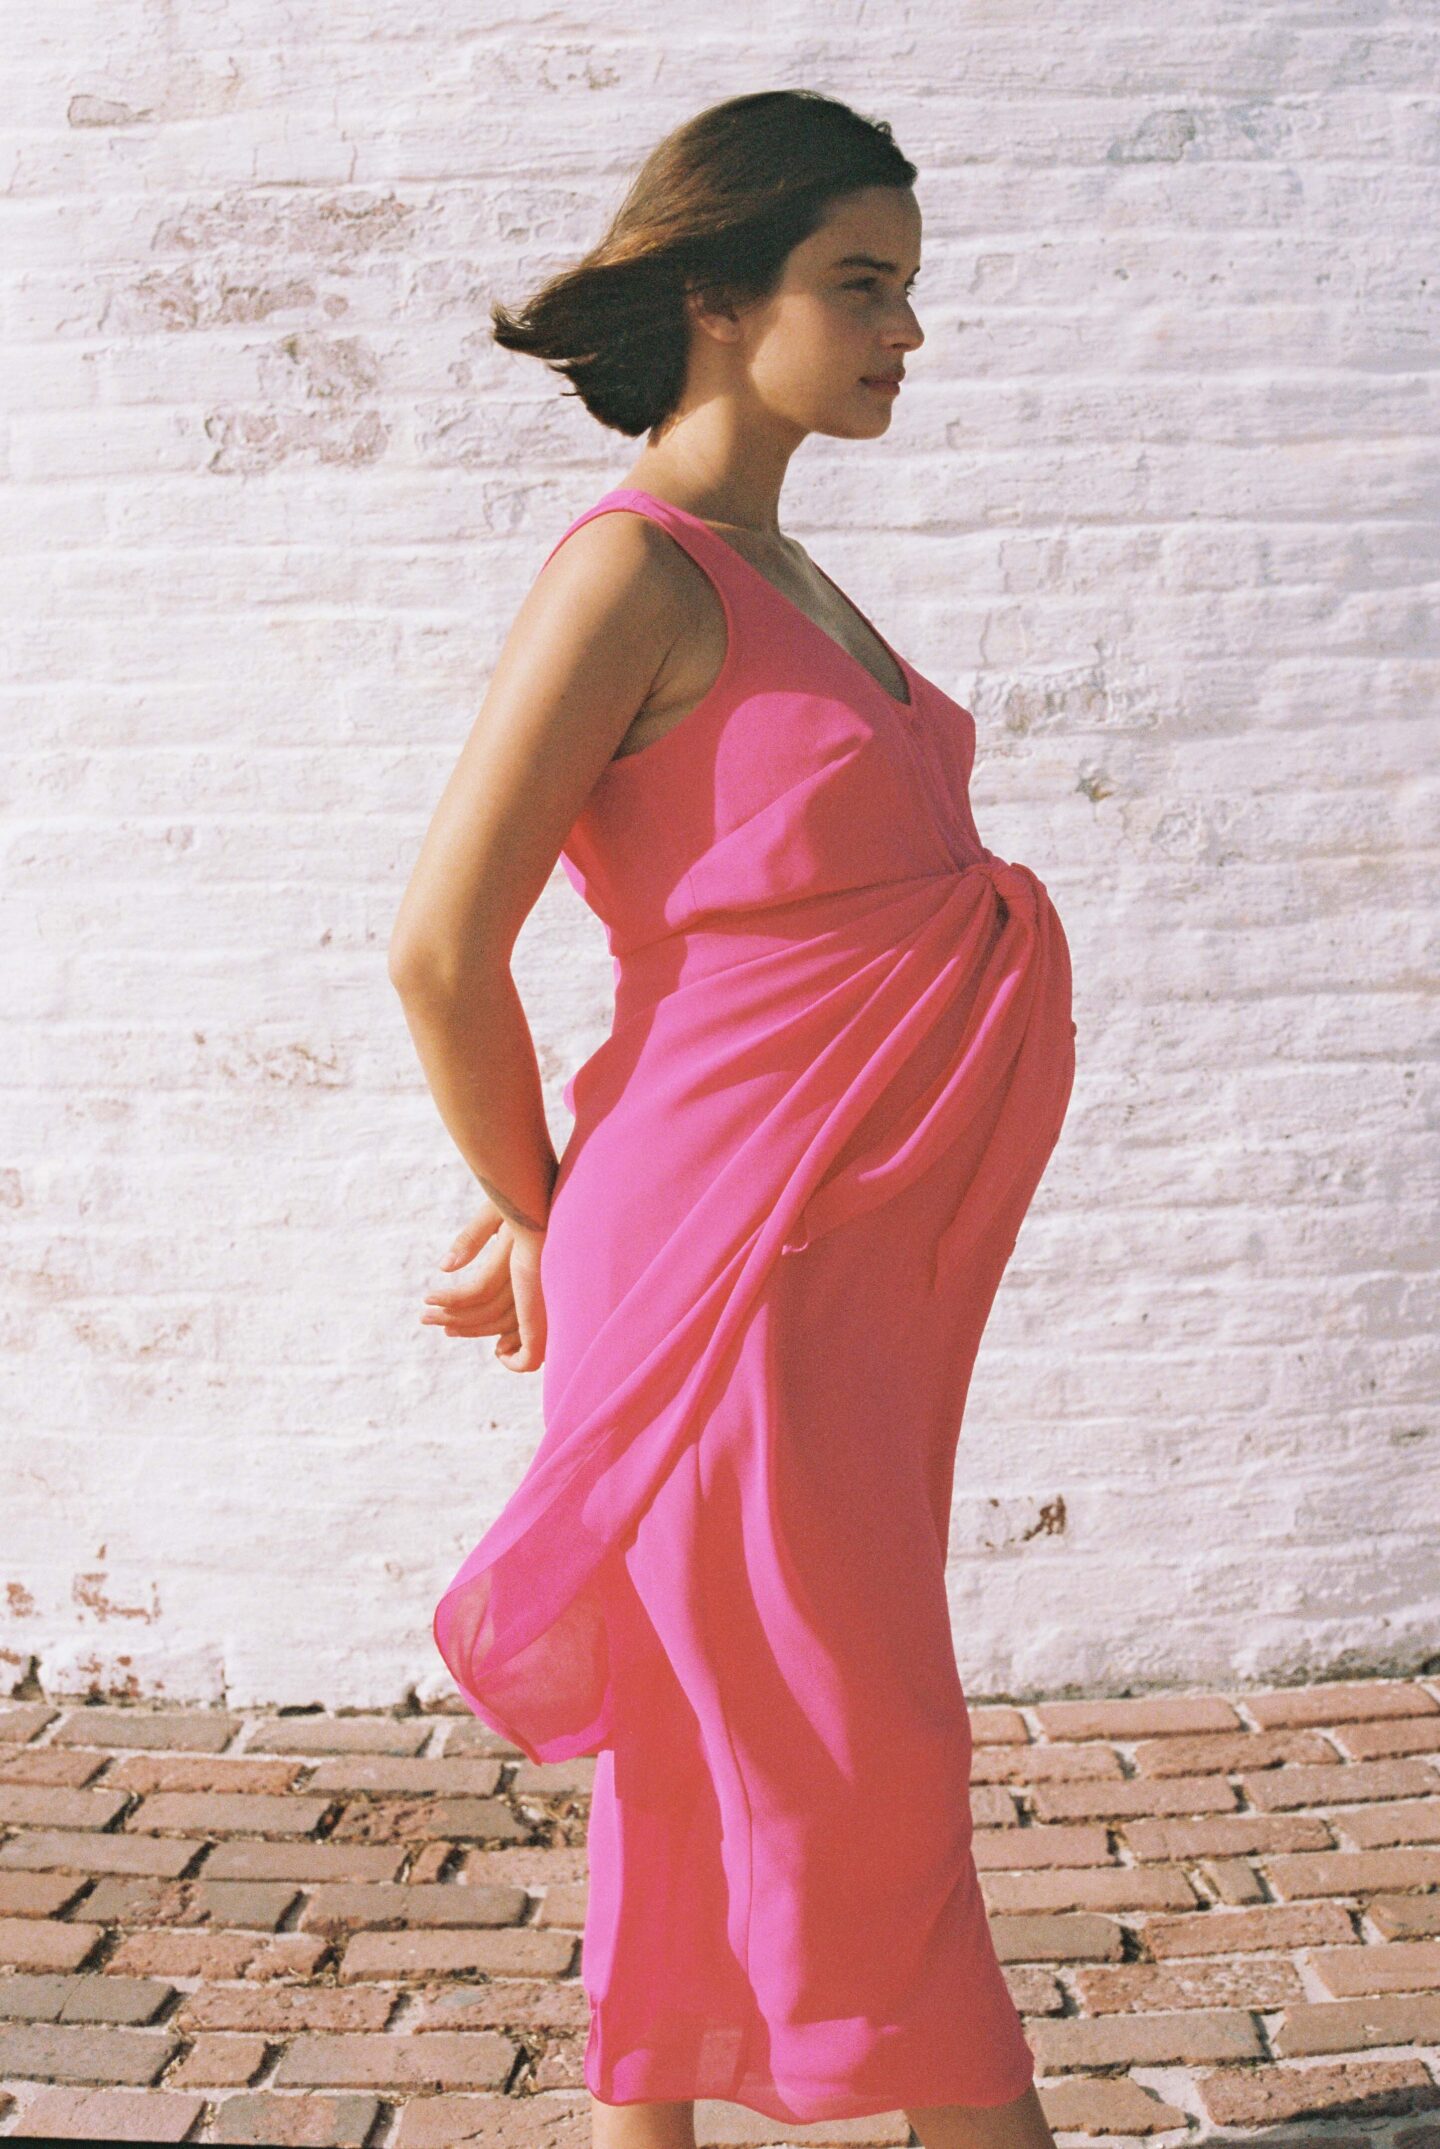 pregnant woman in profile wearing a pink dress